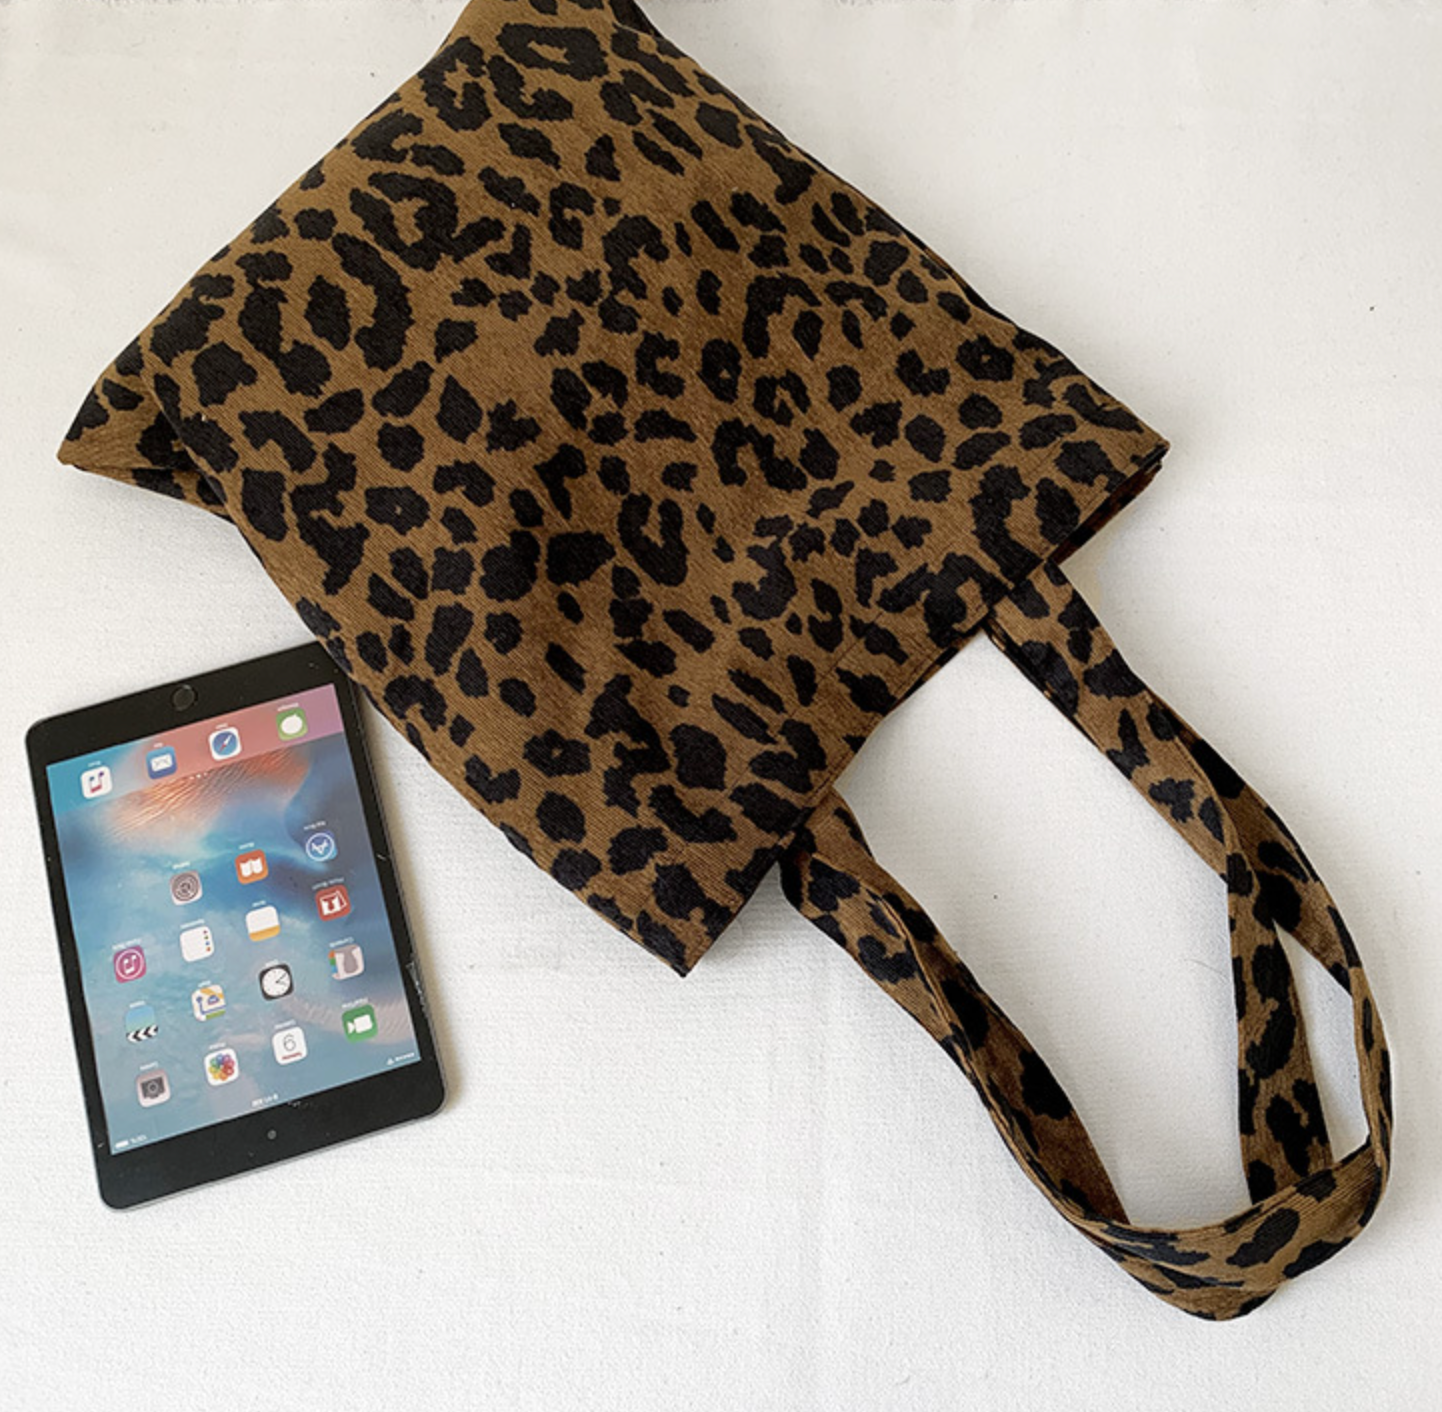 Leopard Print Two Style Tote Bags